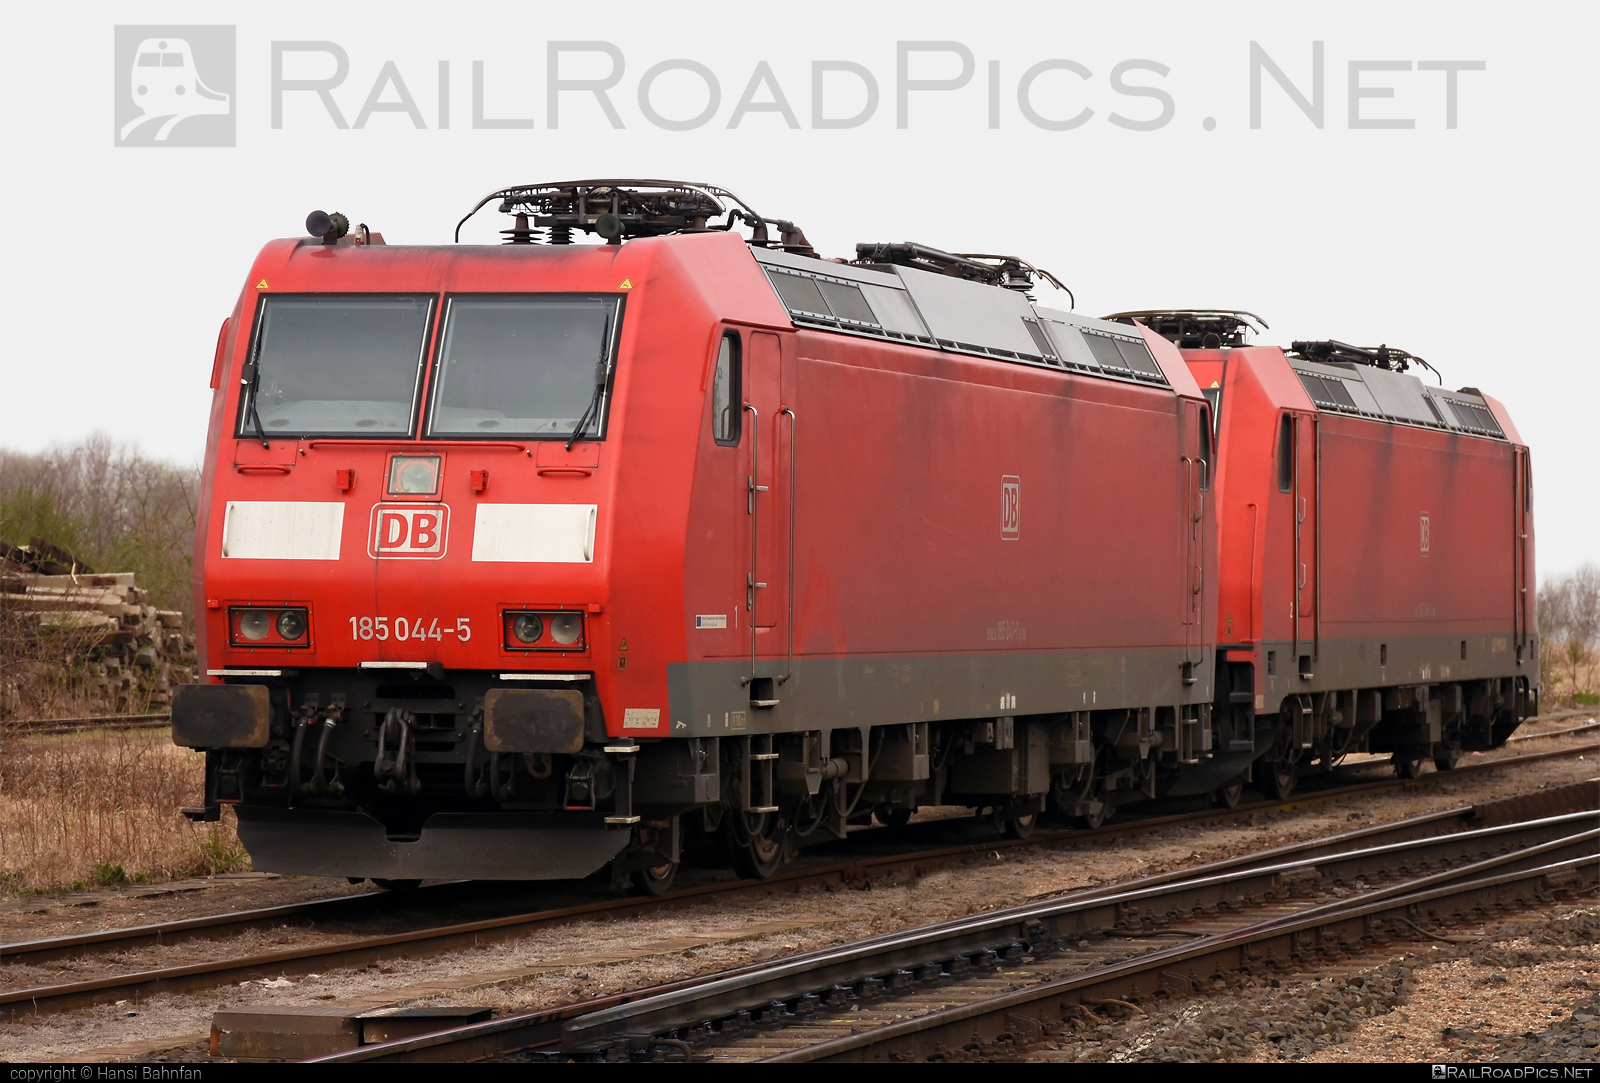 Bombardier TRAXX F140 AC1 - 185 044-5 operated by DB Cargo AG #bombardier #bombardiertraxx #db #dbcargo #dbcargoag #deutschebahn #traxx #traxxf140 #traxxf140ac #traxxf140ac1